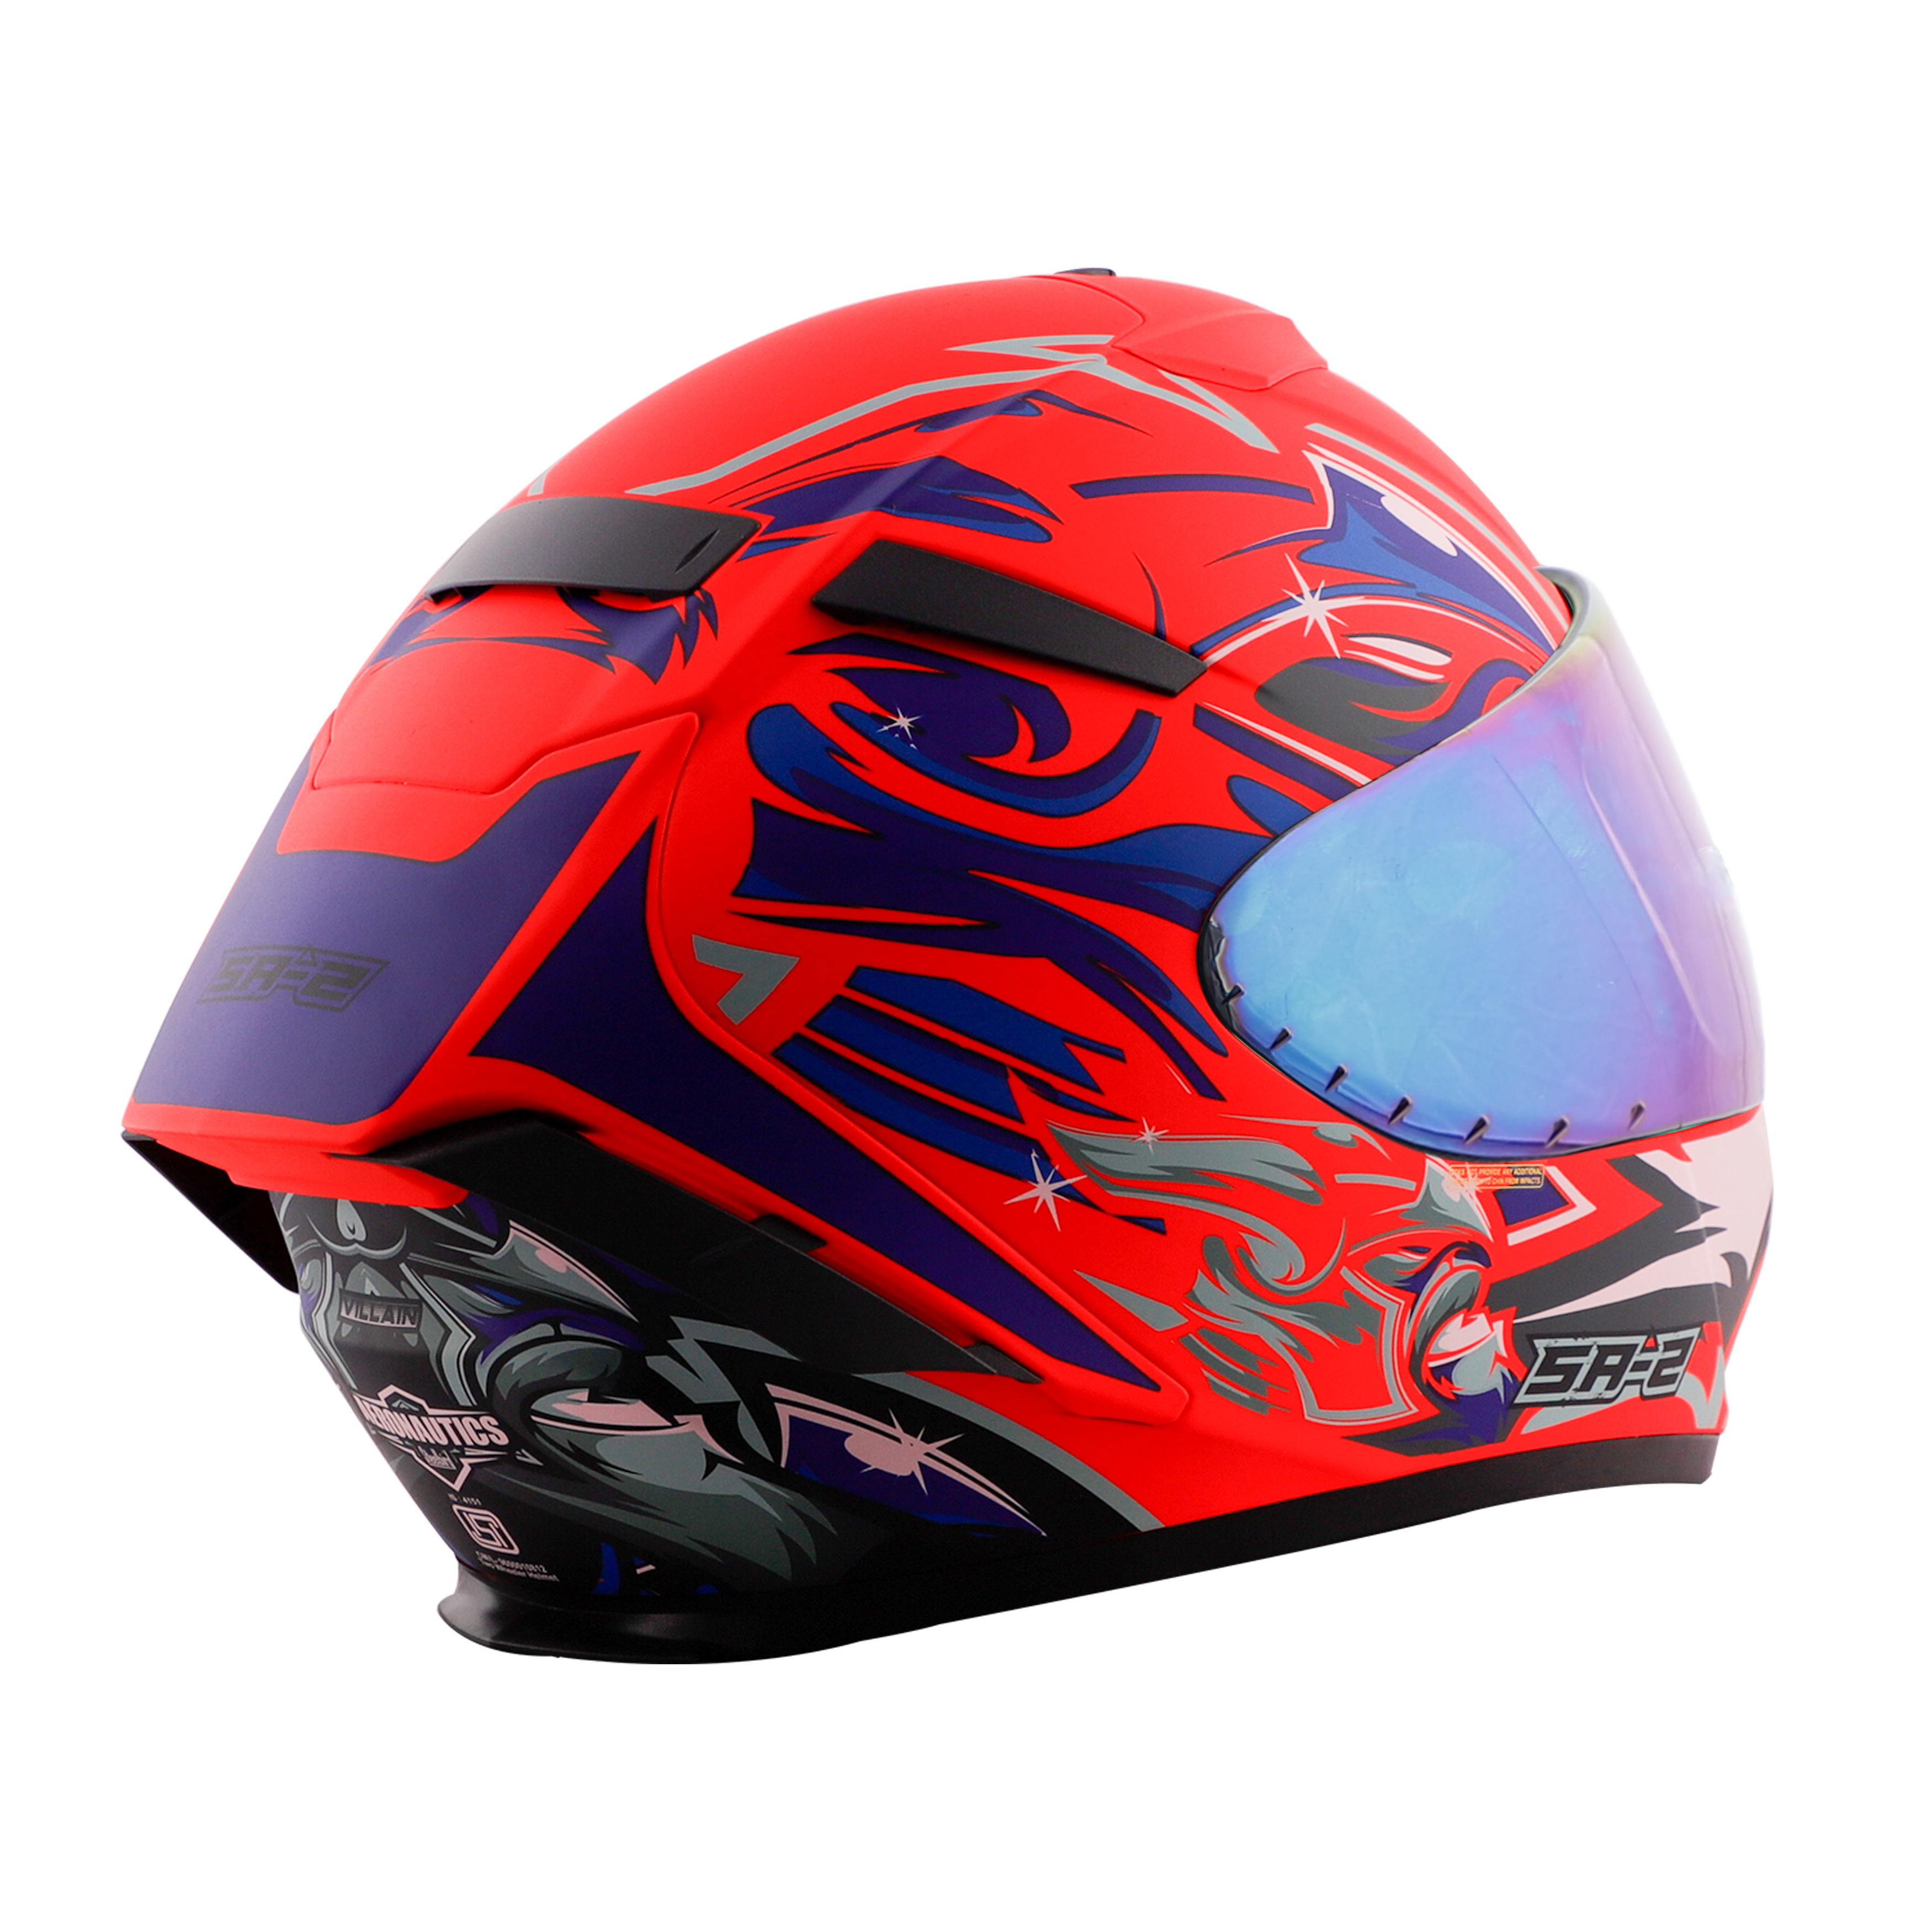 SA-2 VILLAIN GLOSSY FLUO WATERMELON WITH BLUE (FITTED WITH CLEAR VISOR EXTRA RAINBOW CHROME VISOR FREE)